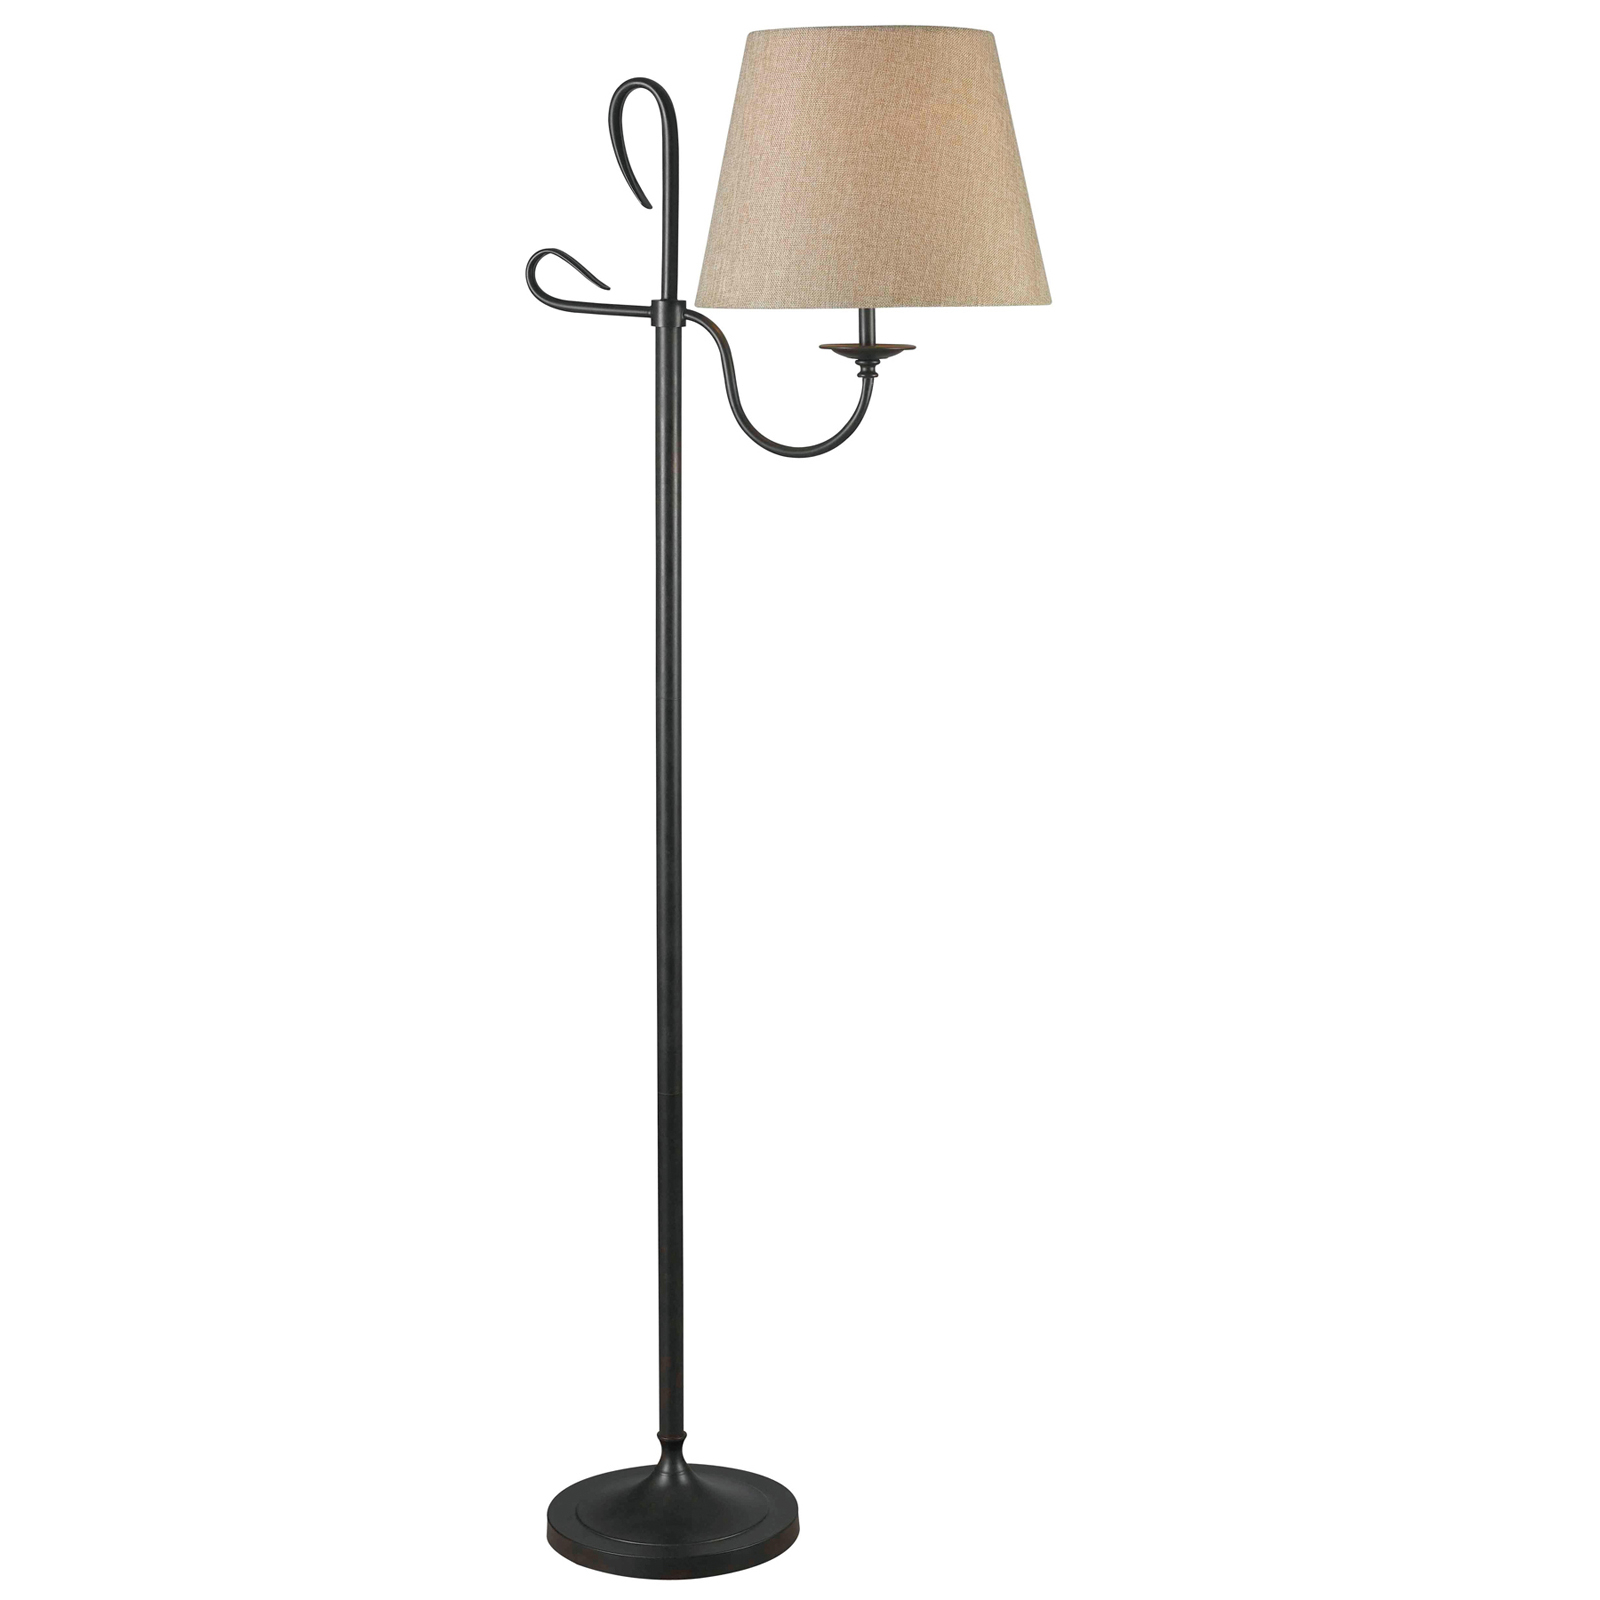 Kmart Floor Lamps R On Simple For Table Wooden Spotlight throughout proportions 1600 X 1600